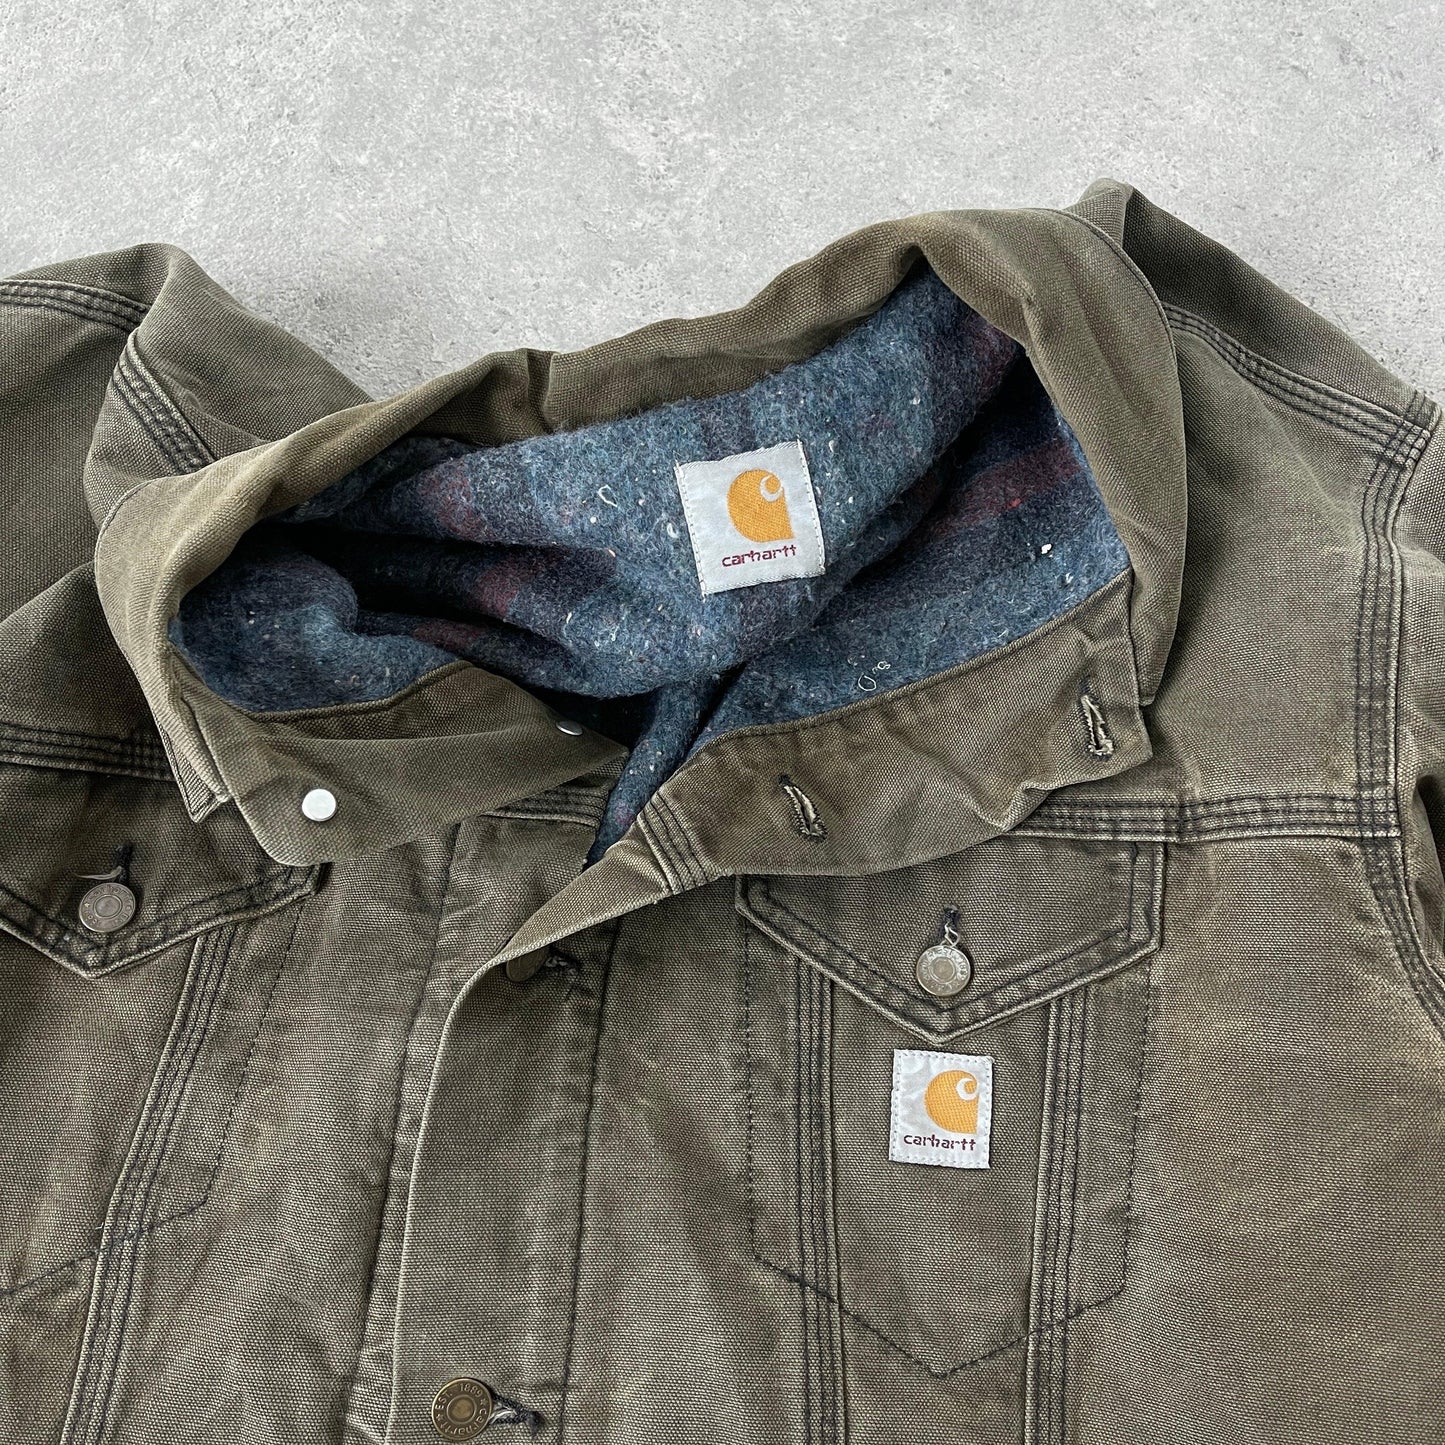 Carhartt 2000s heavyweight blanket lined Chore jacket (L) - Known Source